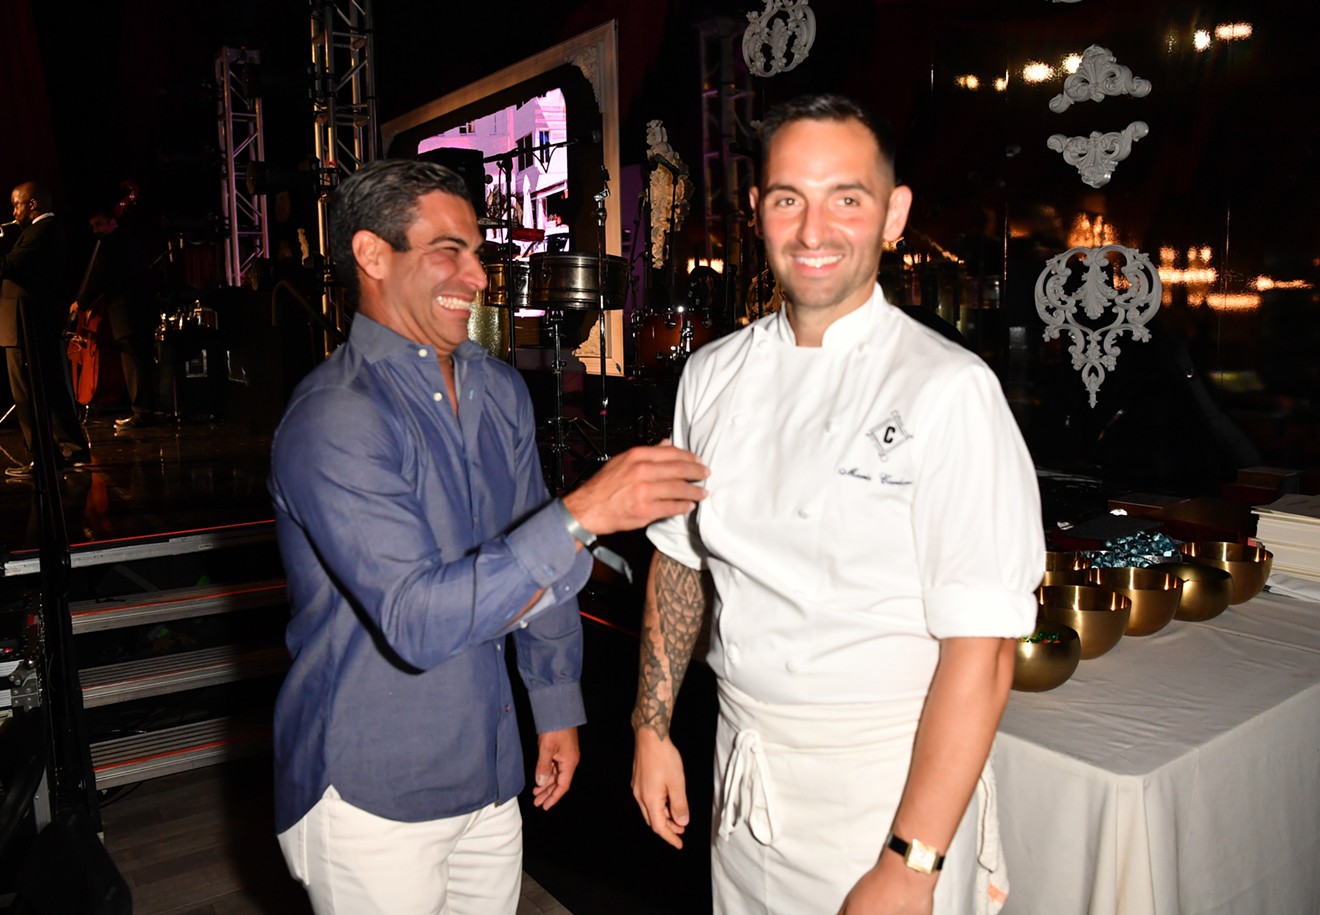 Mayor Francis Suarez kicks it with chef Mario Carbone at the American Express Presents Carbone Beach event on May 7, 2022, in Miami Beach. Suarez's attendance at a similar event the following year prompted an ethics complaint by activist Thomas Kennedy.